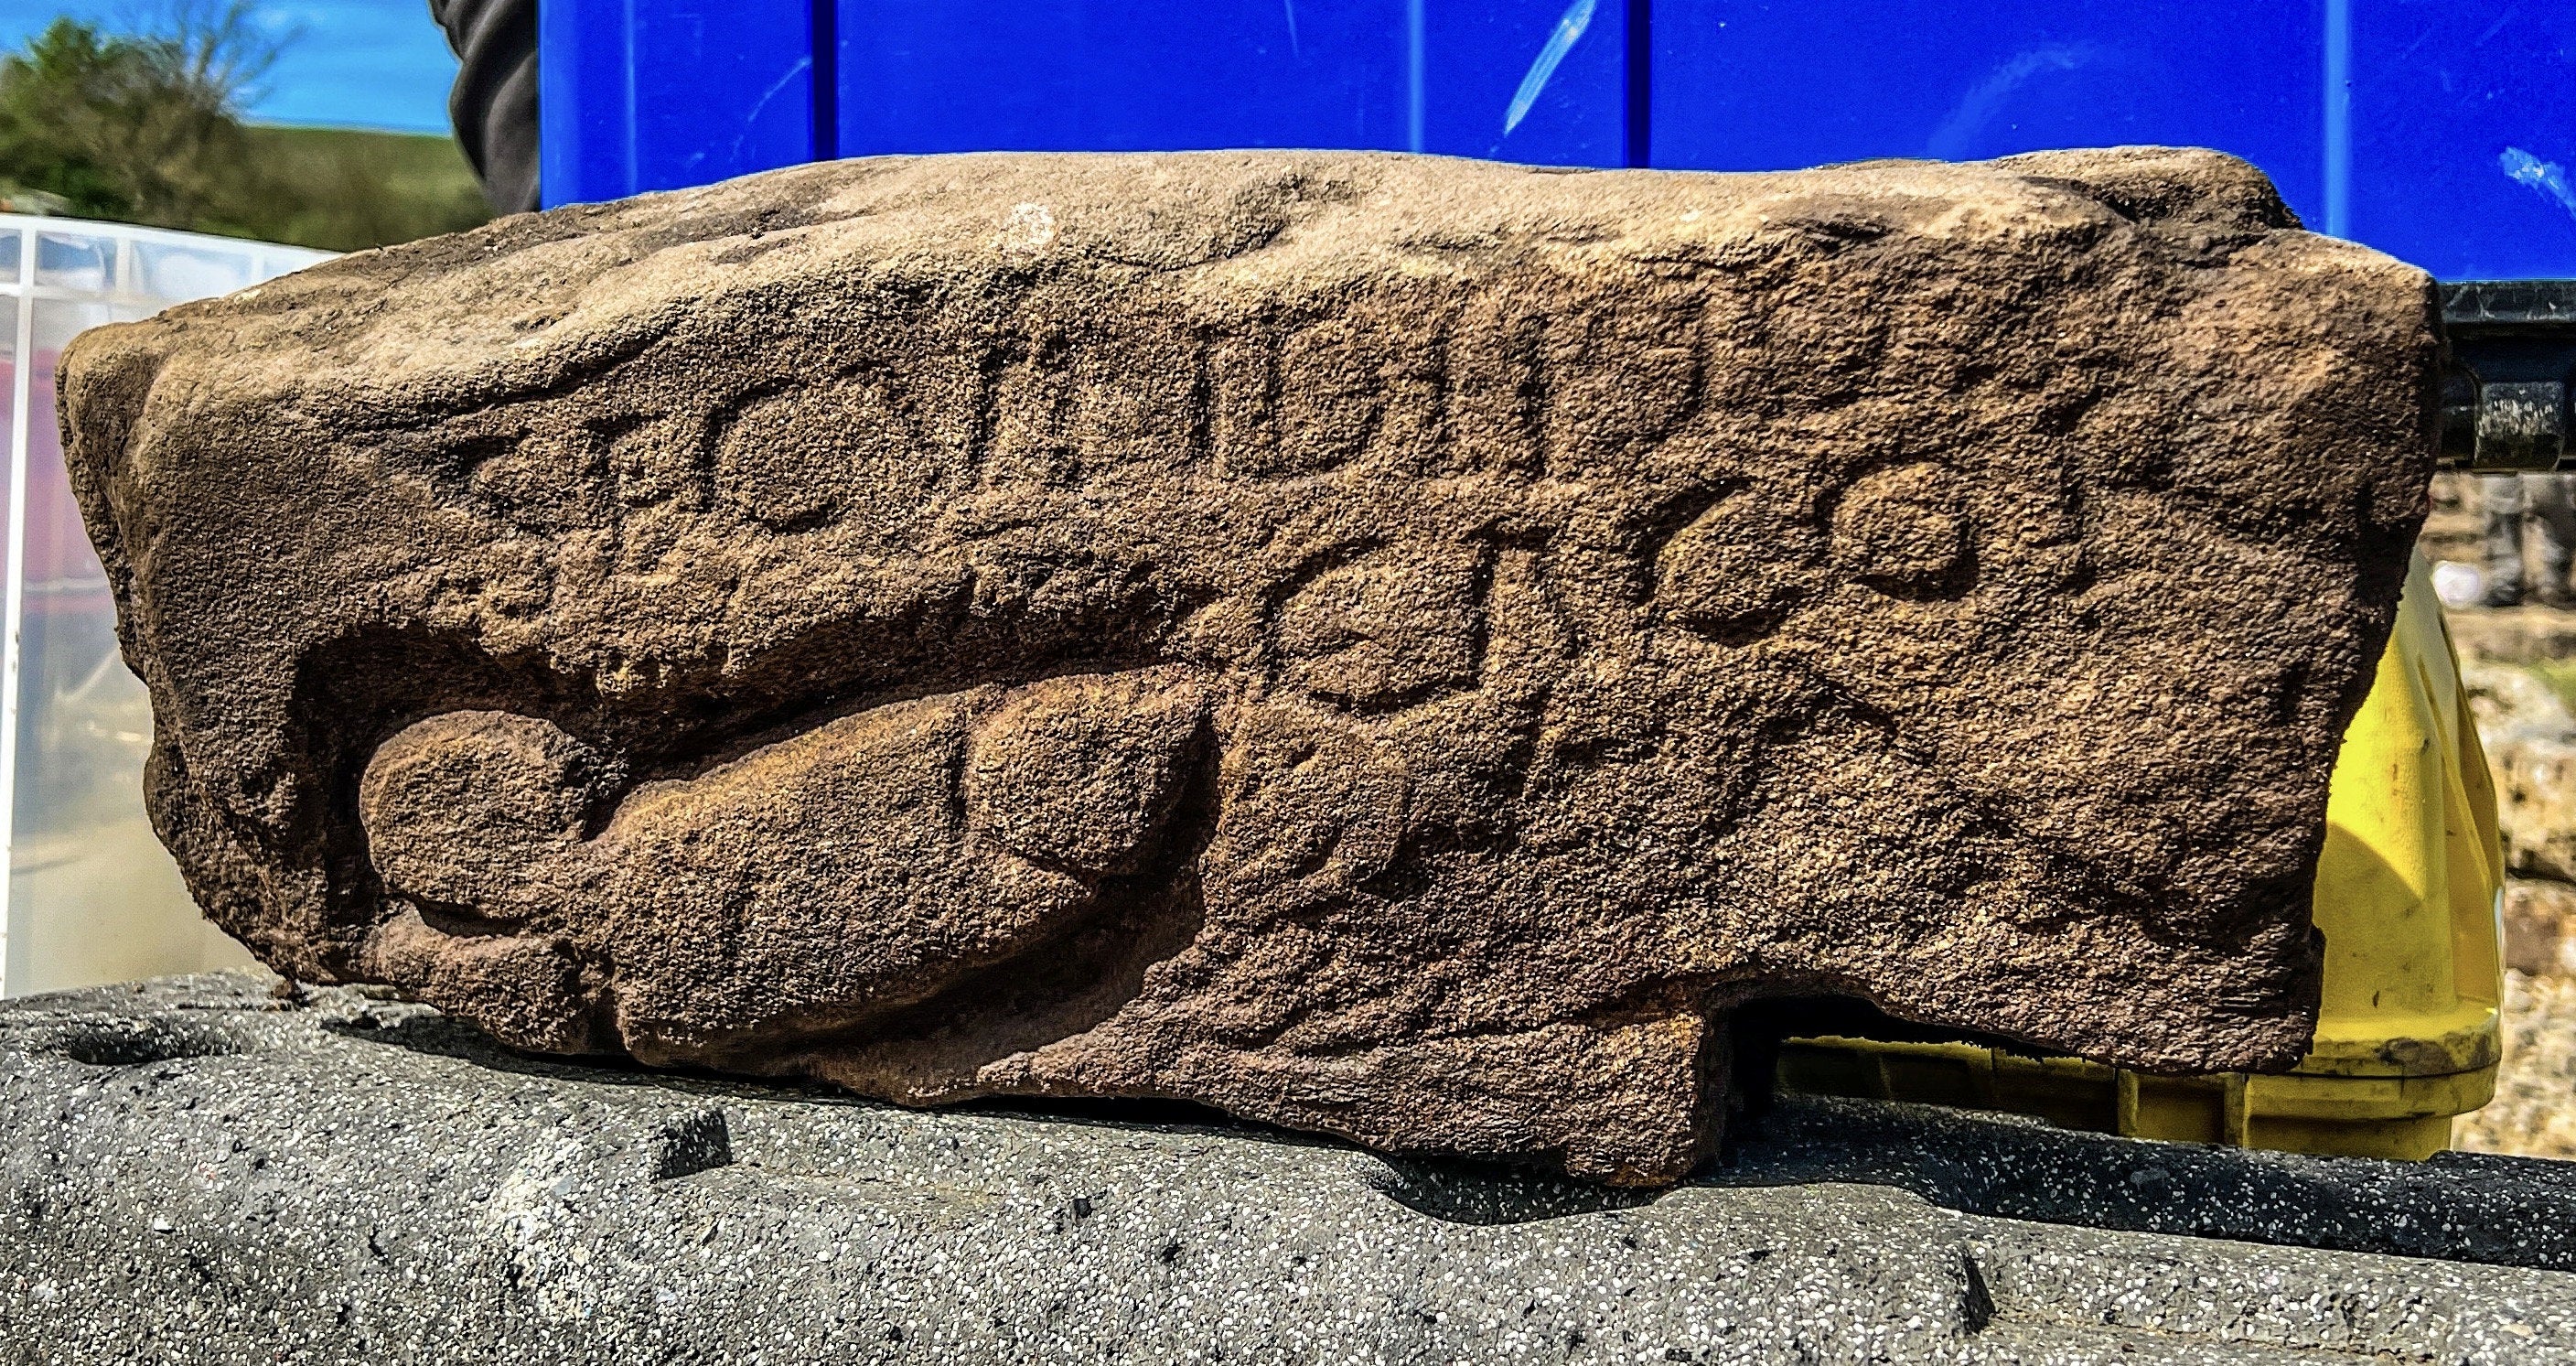 The stone shows a large phallus next to the name of a Roman soldier and the word “Cacor”